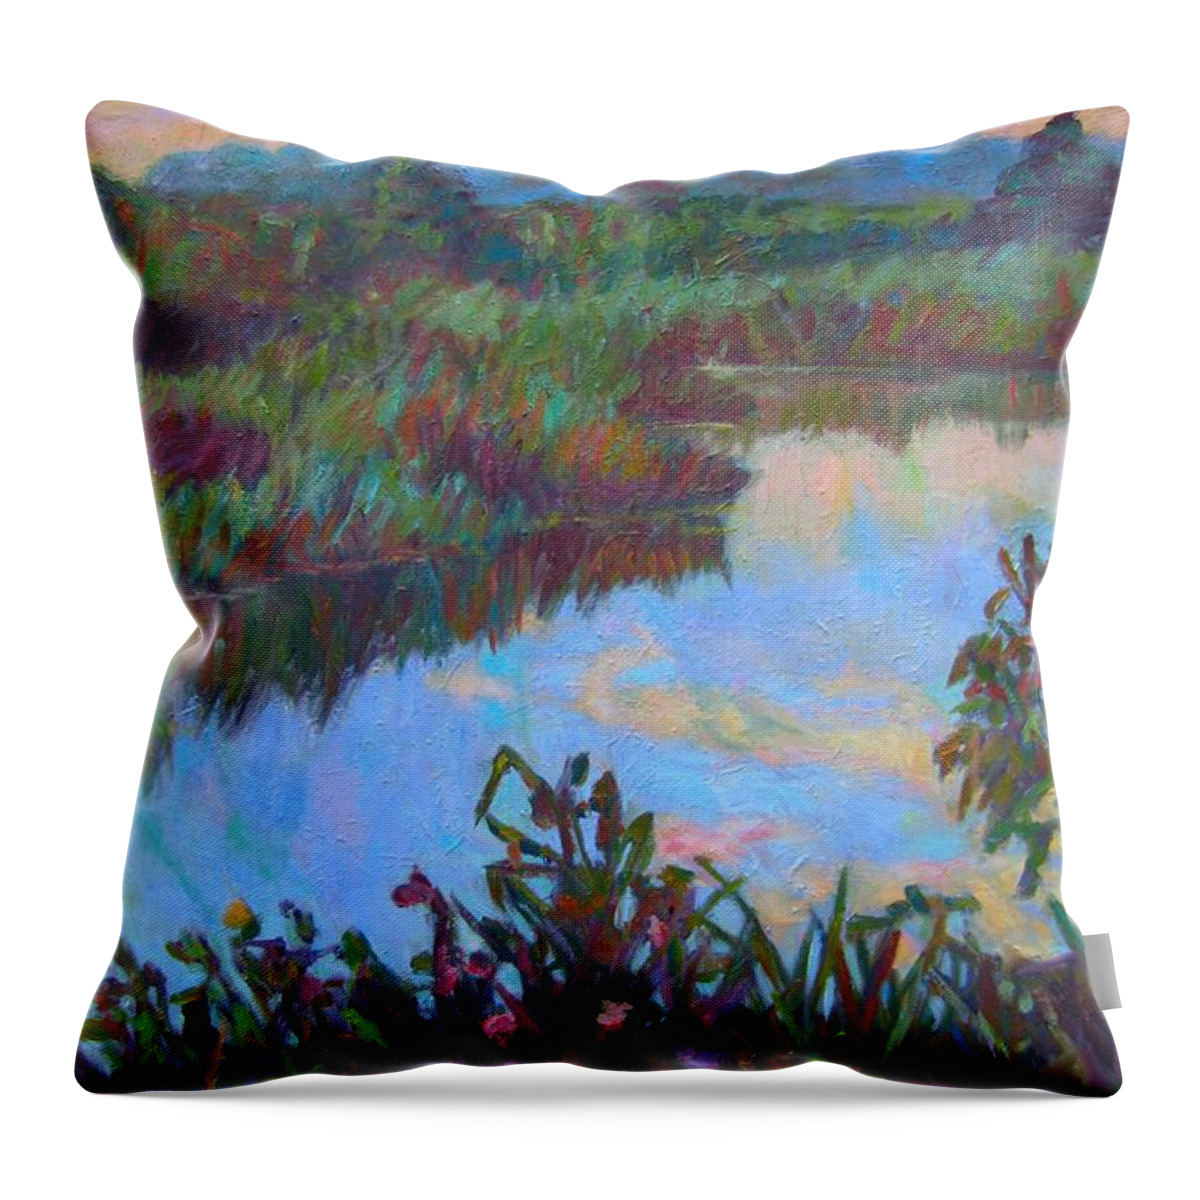 Landscape Throw Pillow featuring the painting Huckleberry Line Trail Rain Pond by Kendall Kessler